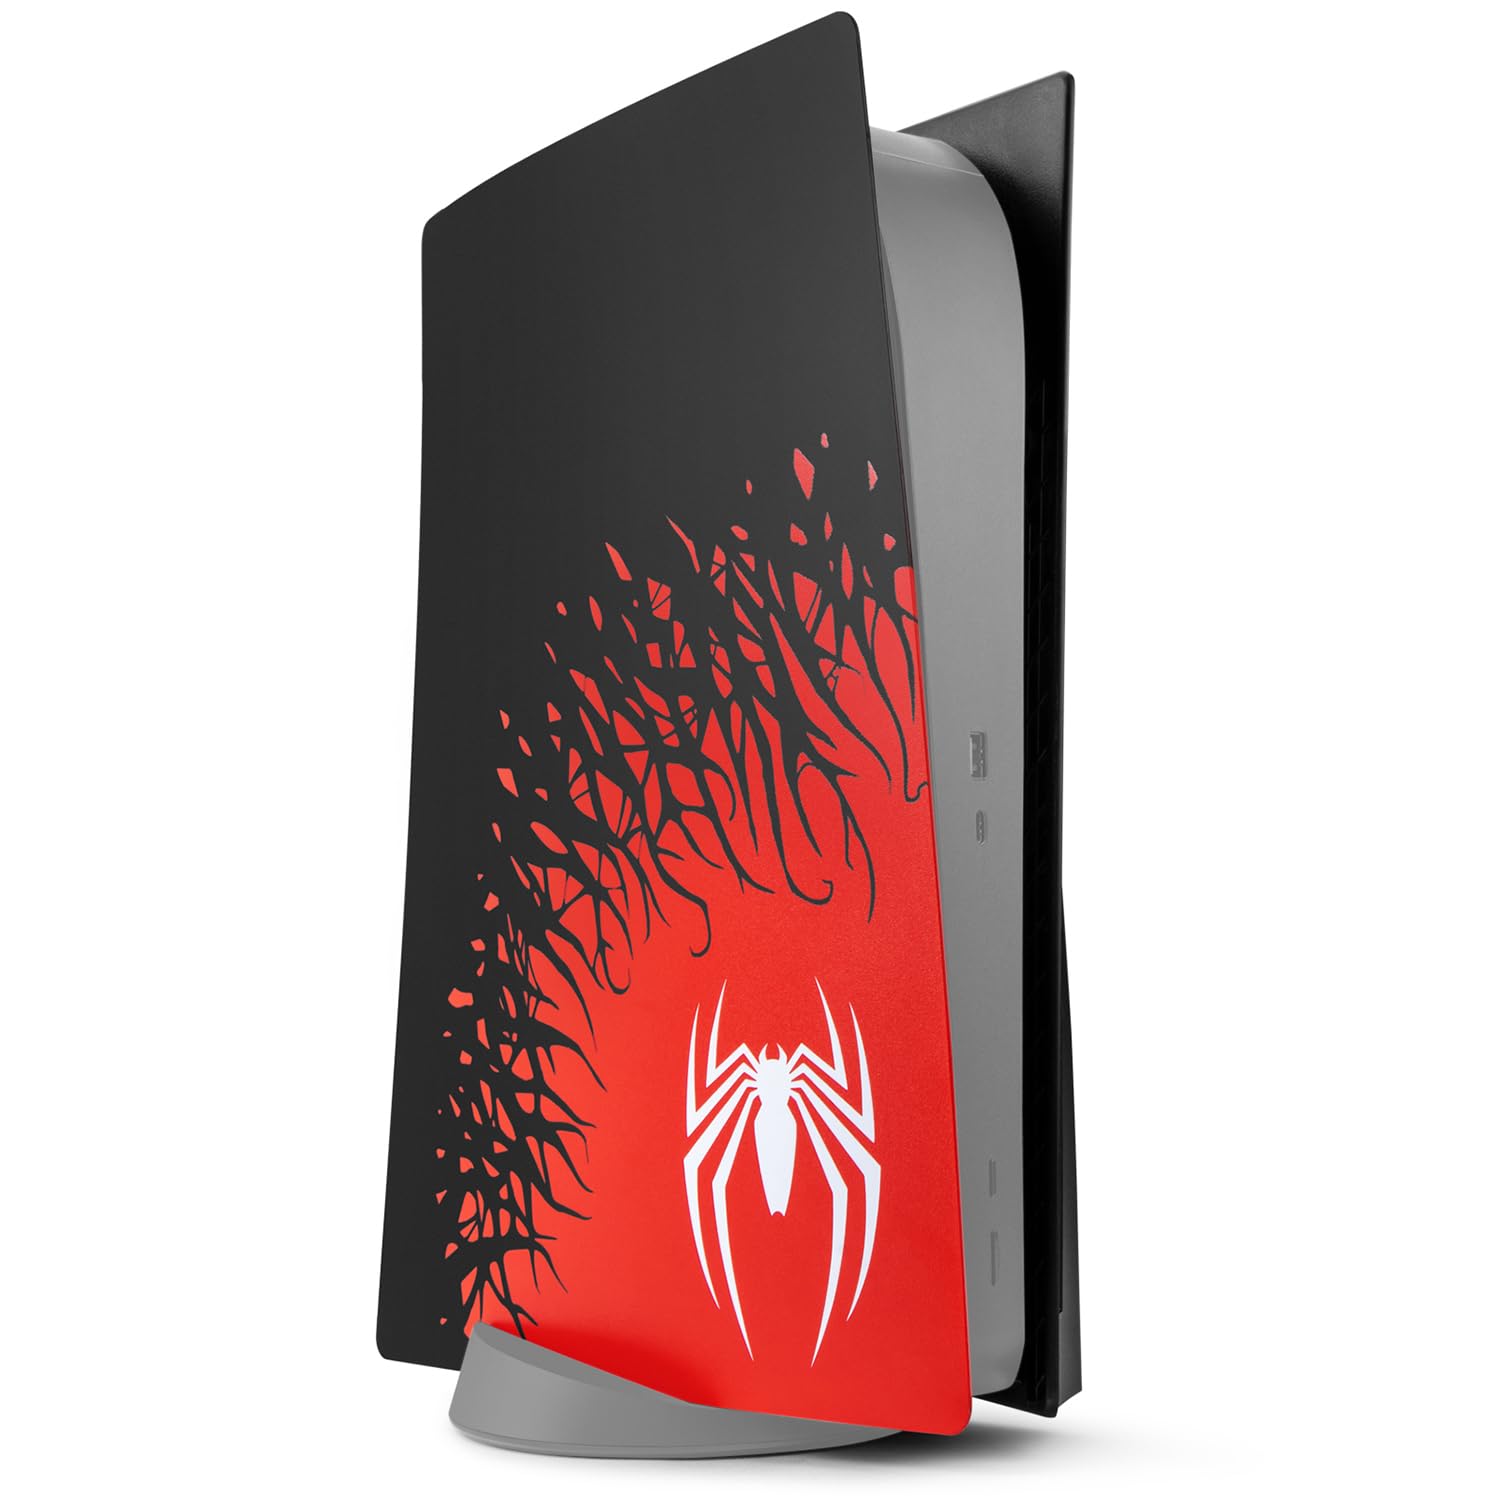 Spider-Man 2 Faceplates for PS5/ PS5 Slim